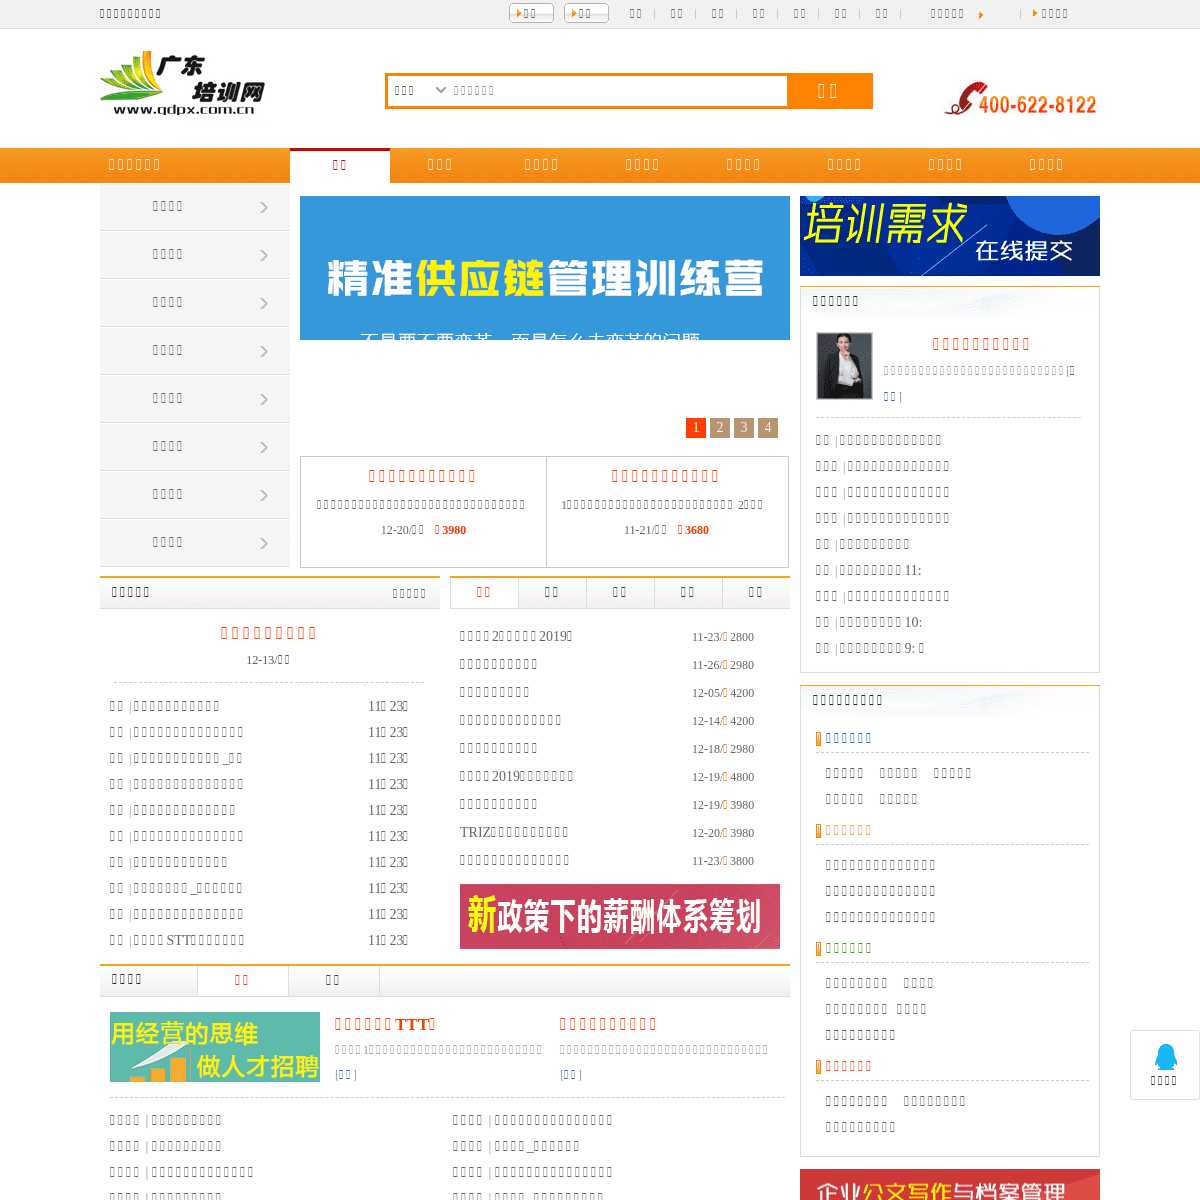 A complete backup of gdpx.com.cn